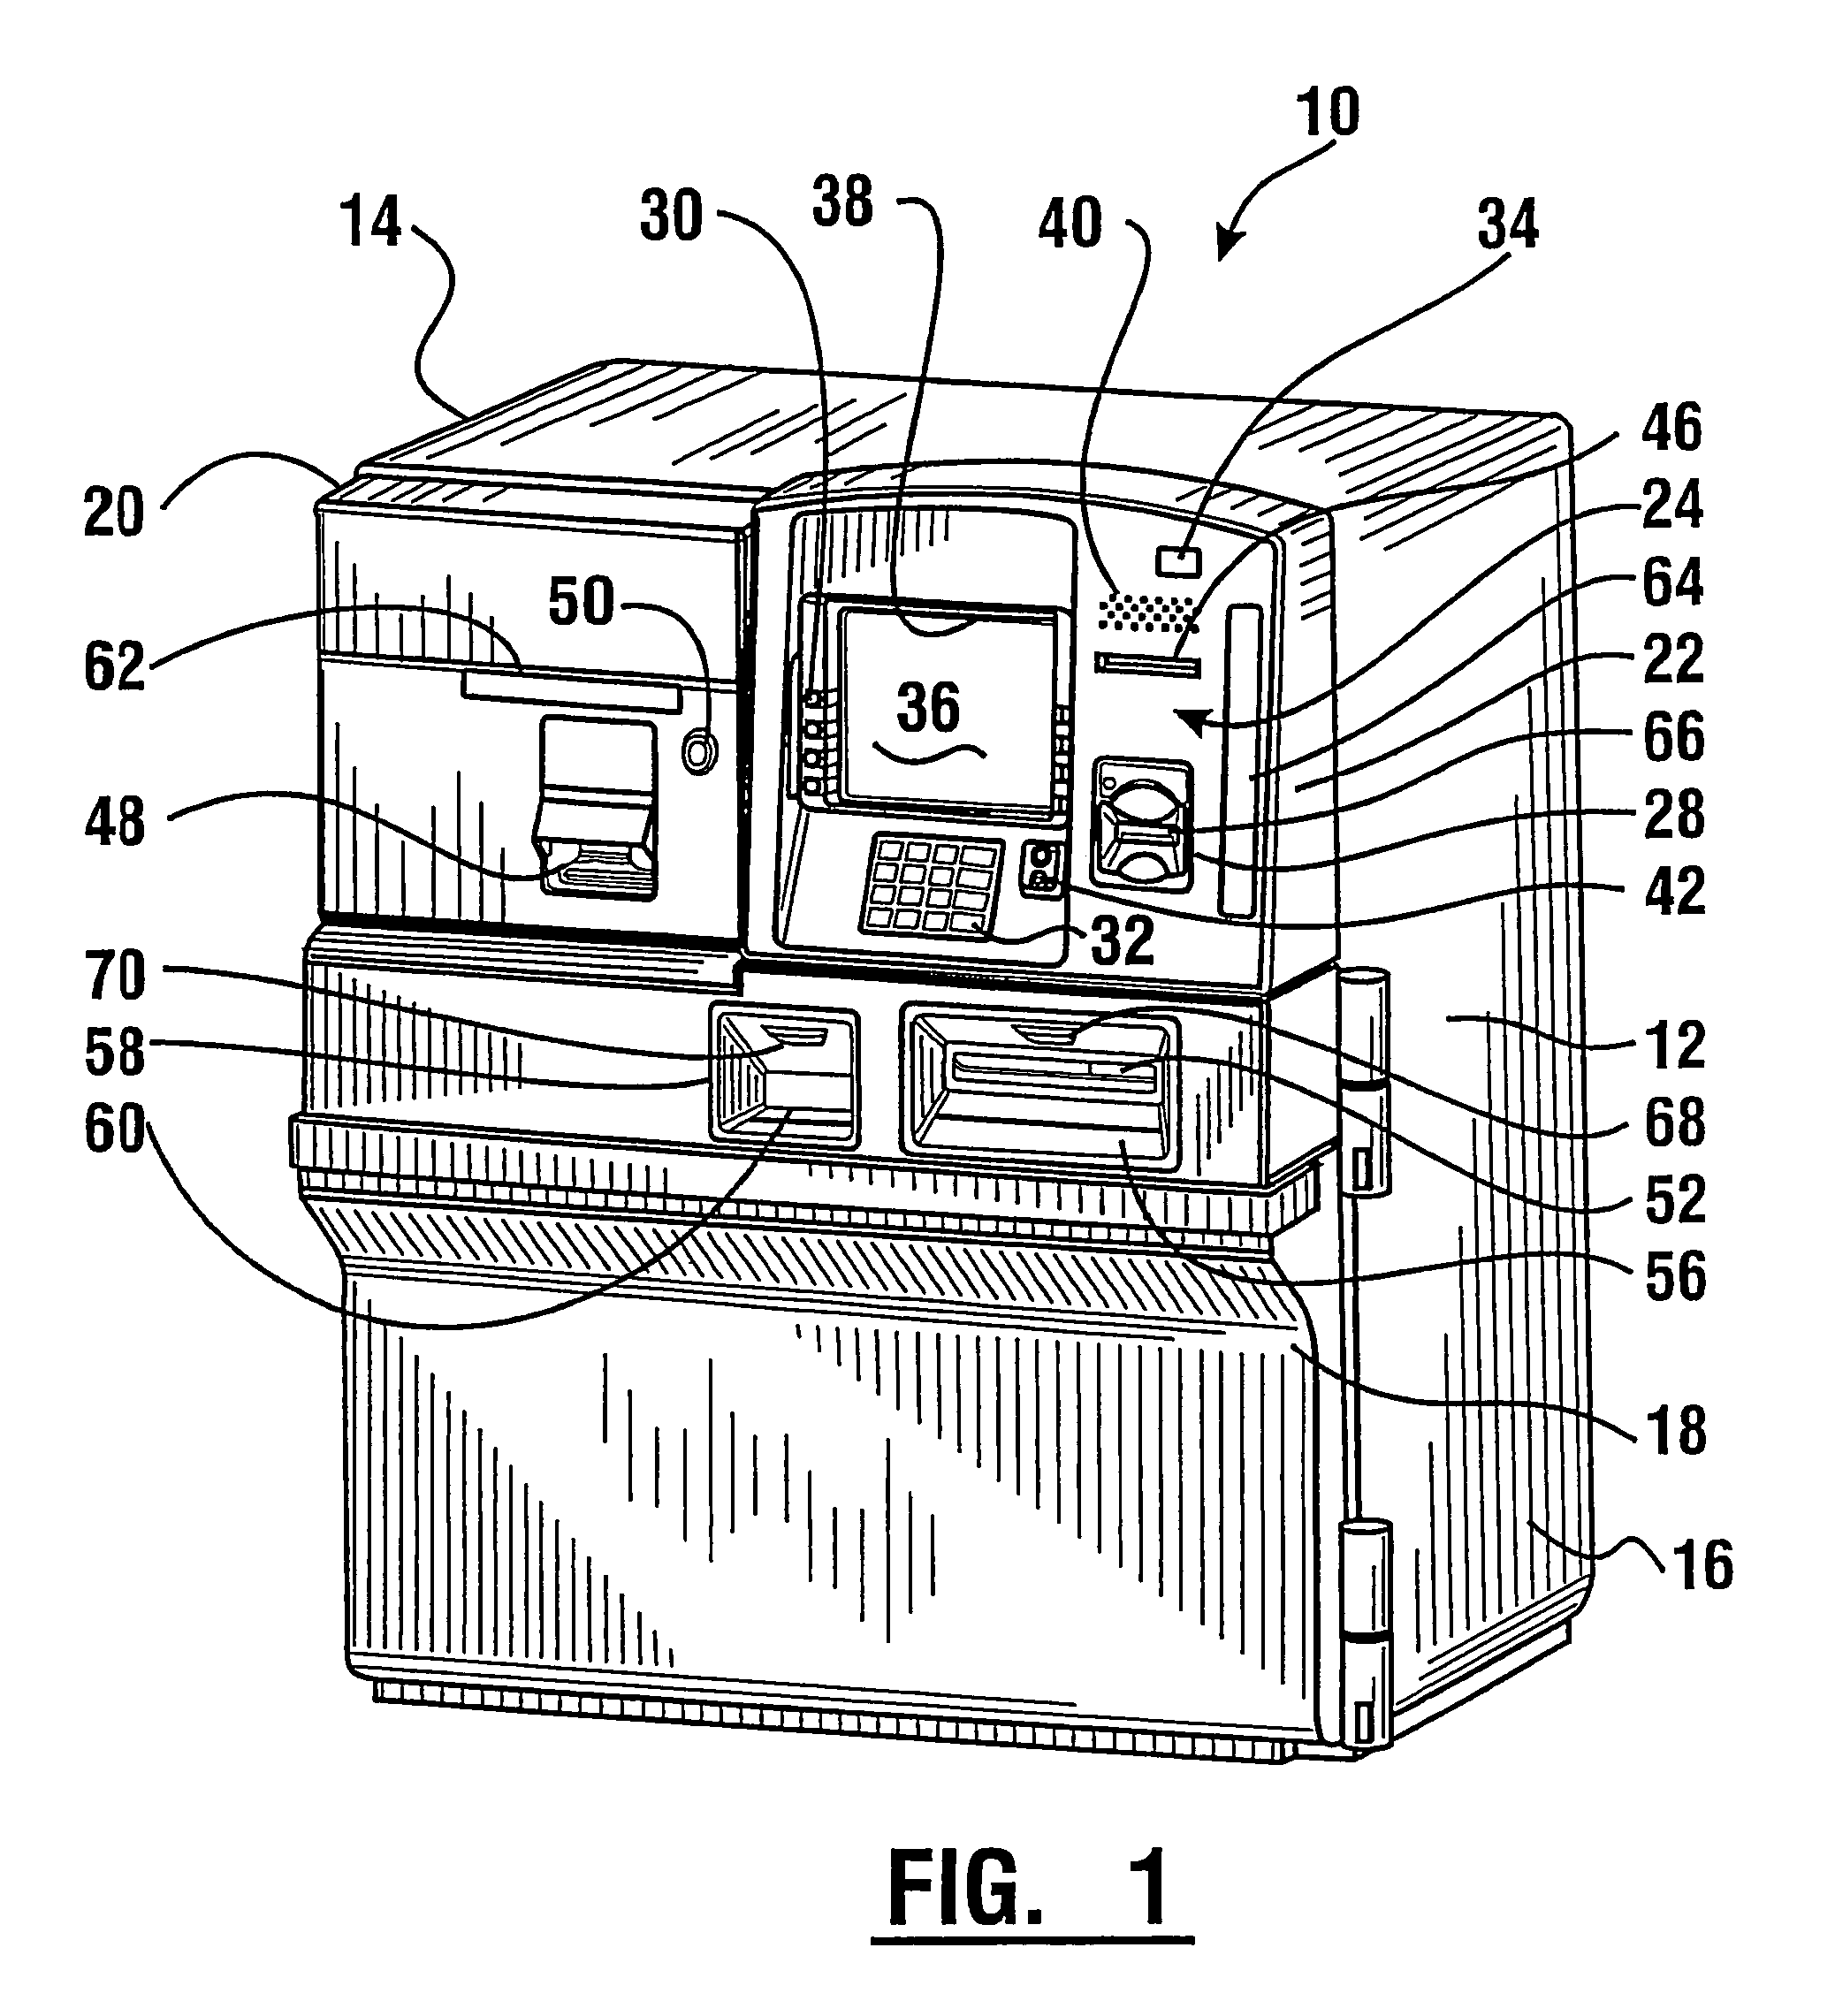 Banking system controlled responsive to data bearing records